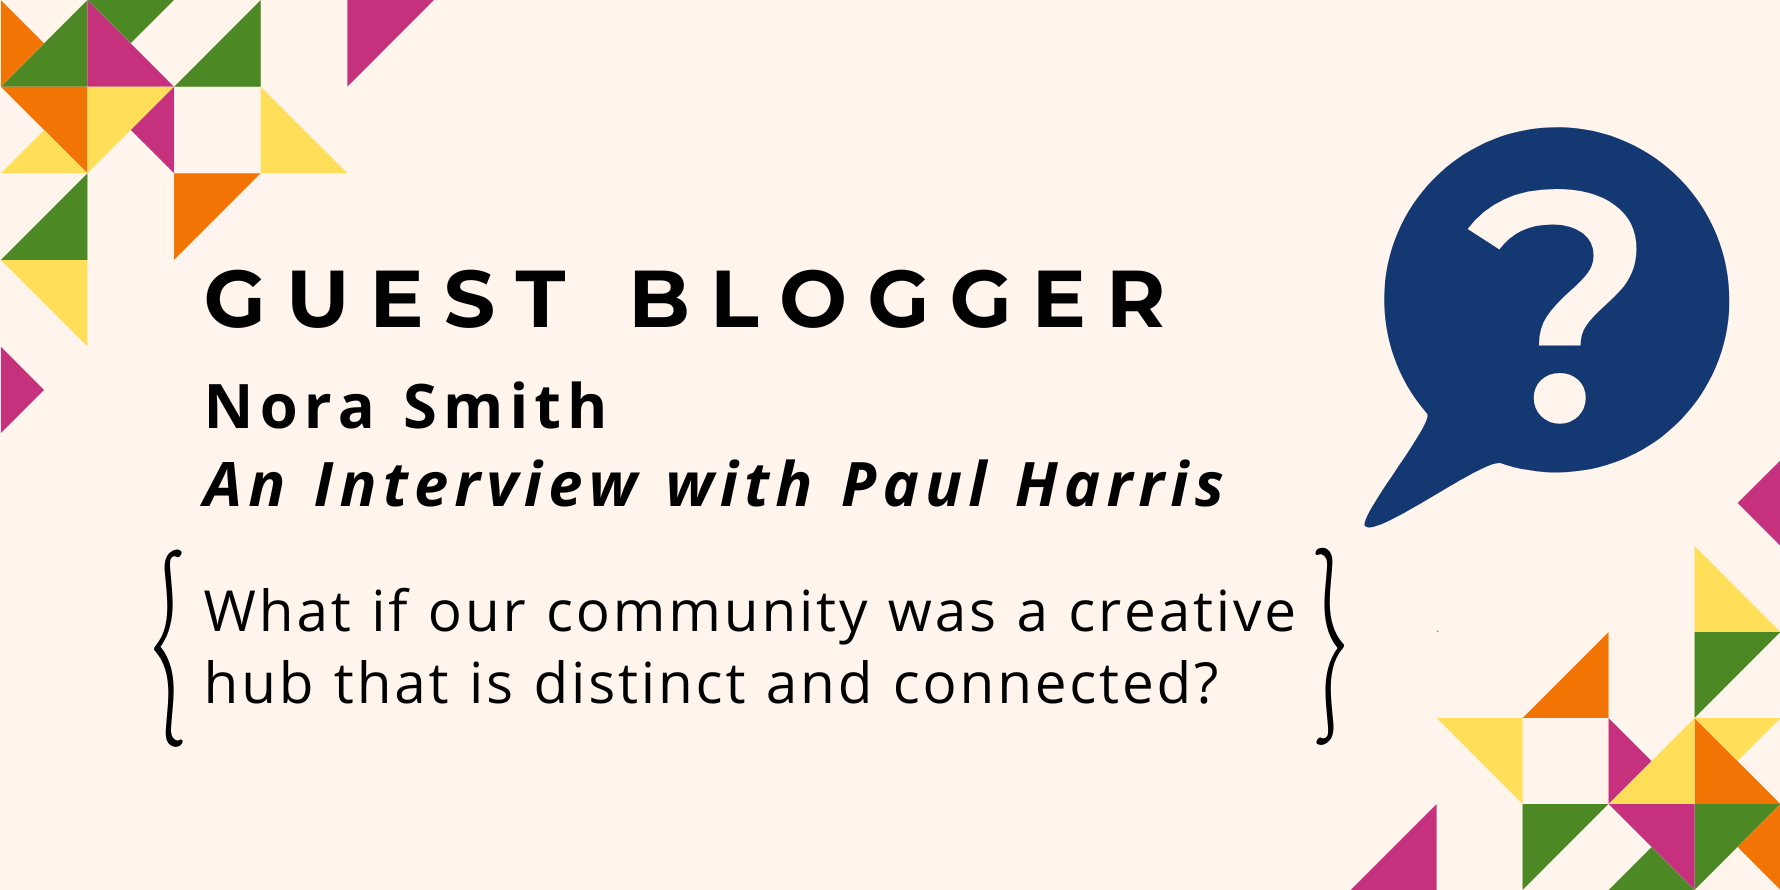 Guest Blogger: Nora Smith. An Interview with Paul Harris. What if our community was a creative Hub that is distinct and connected?